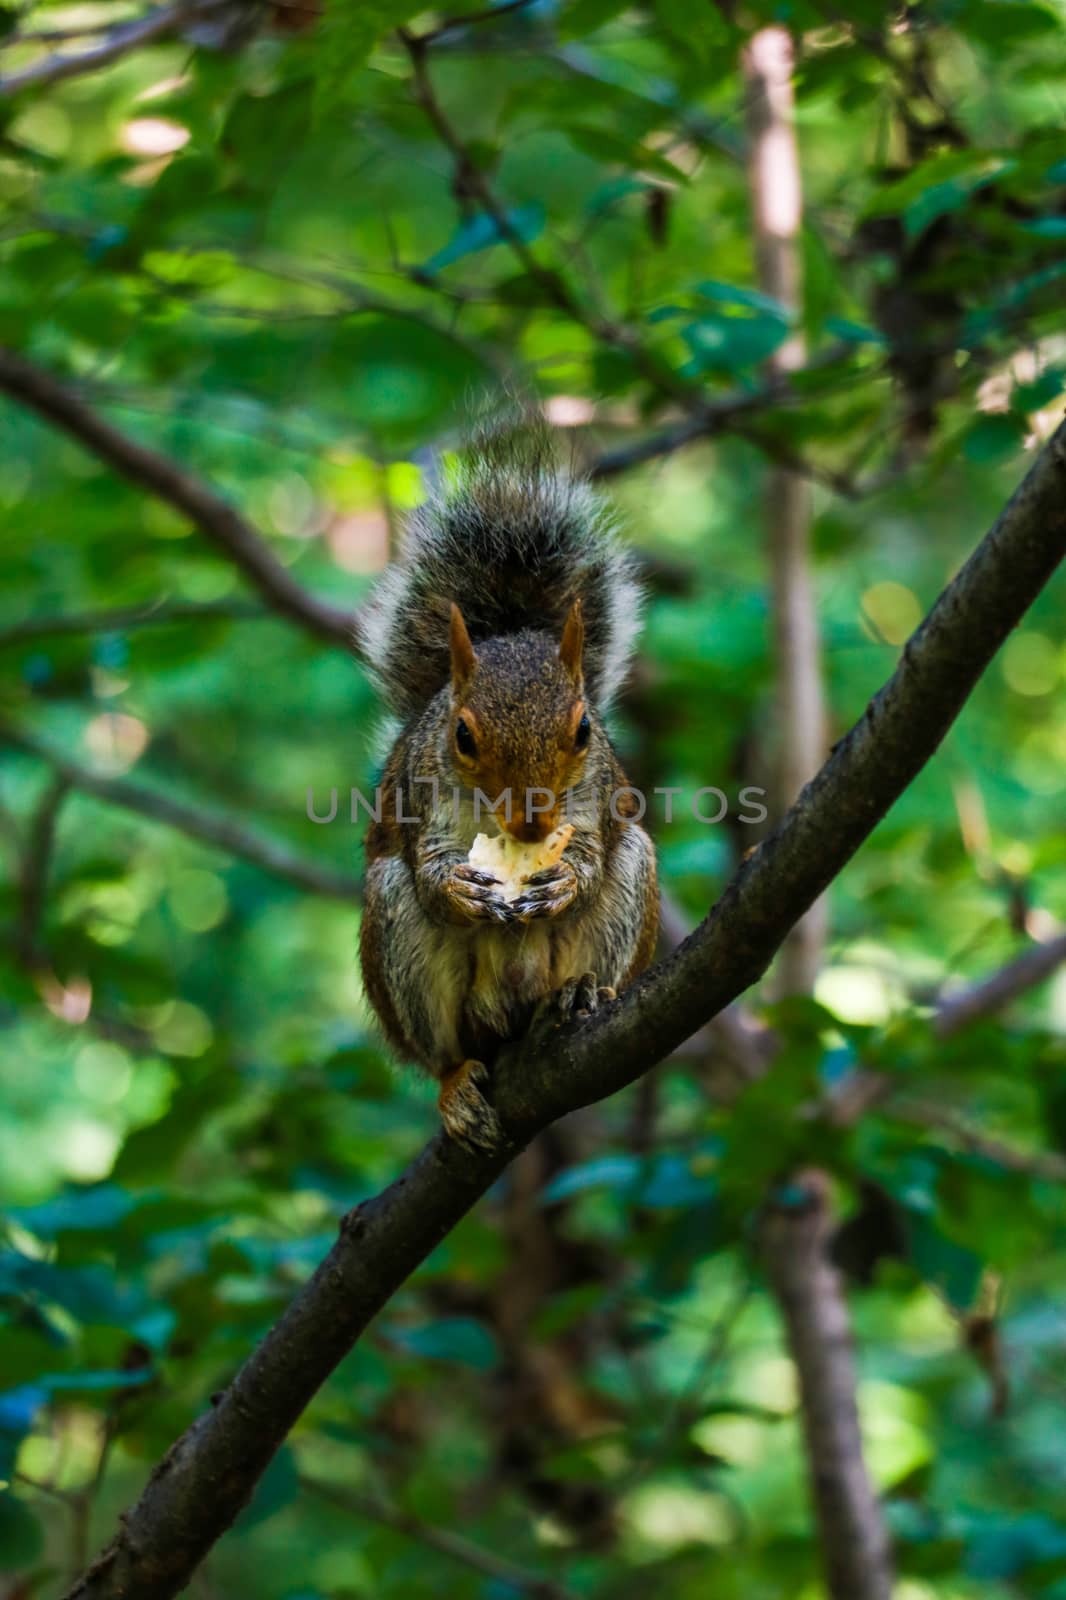 The little squirrel feasting high up in a tree